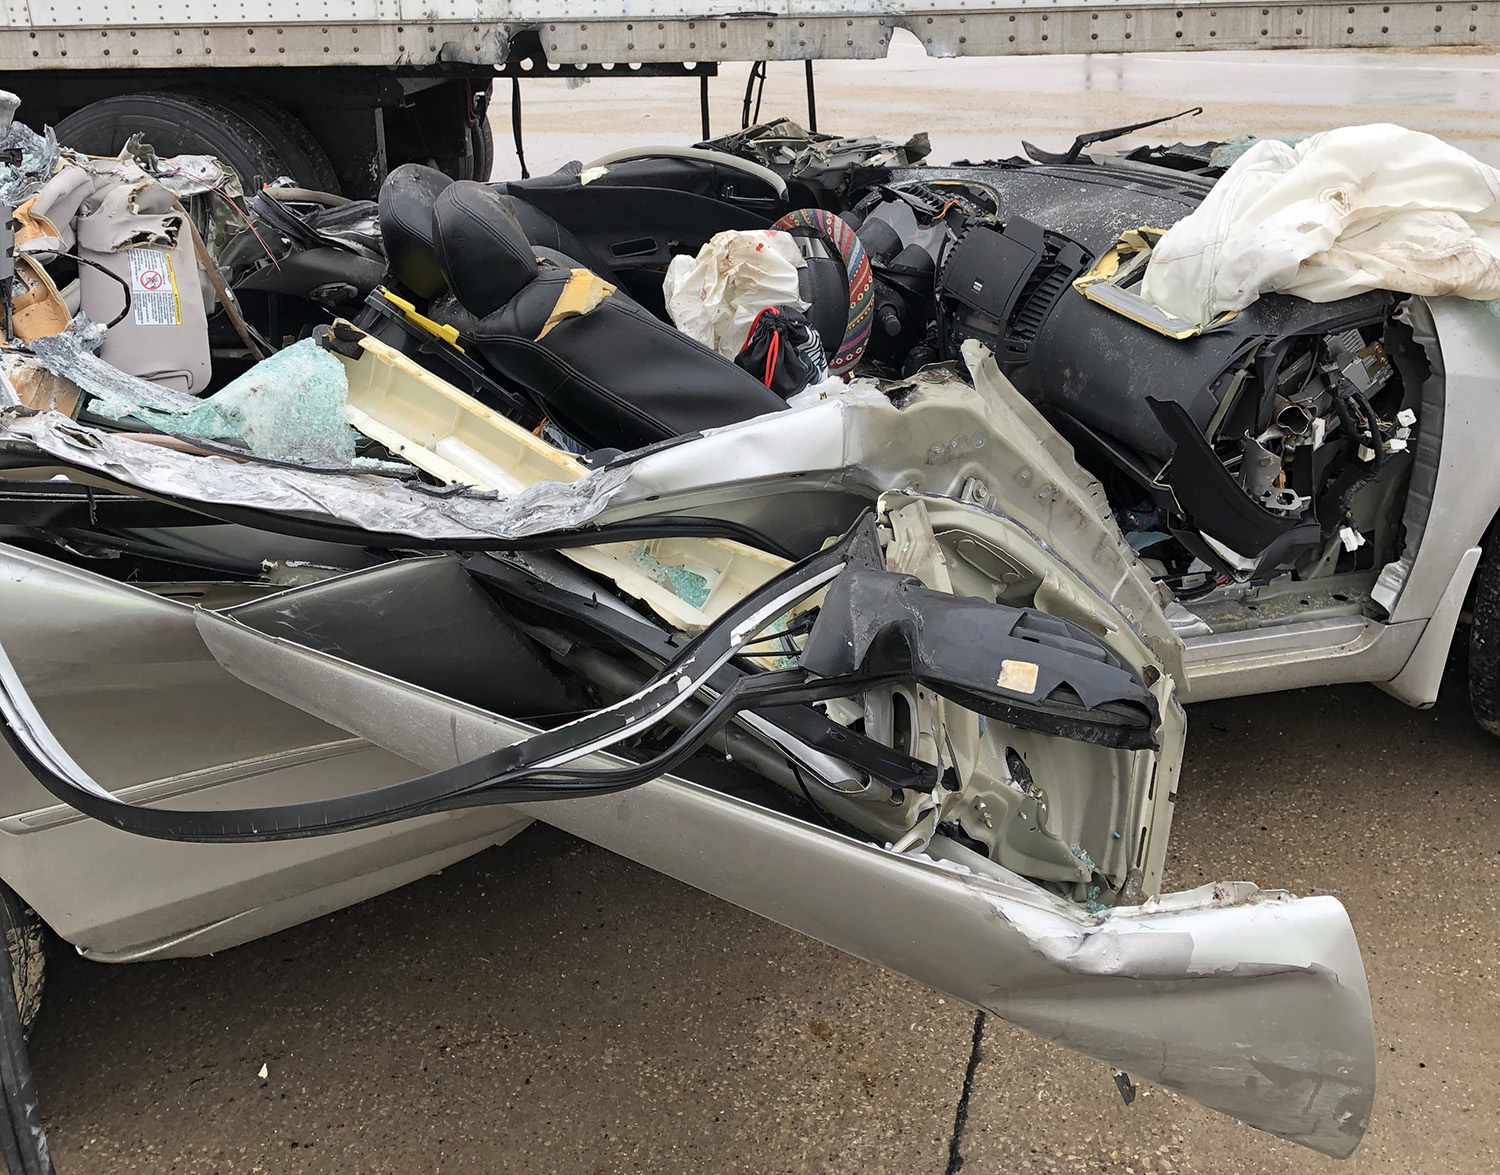 the car Maggie McQuillen was driving the day of her accident. the top of the vehicle has been sheared off and much of the vehicle is in disarray.